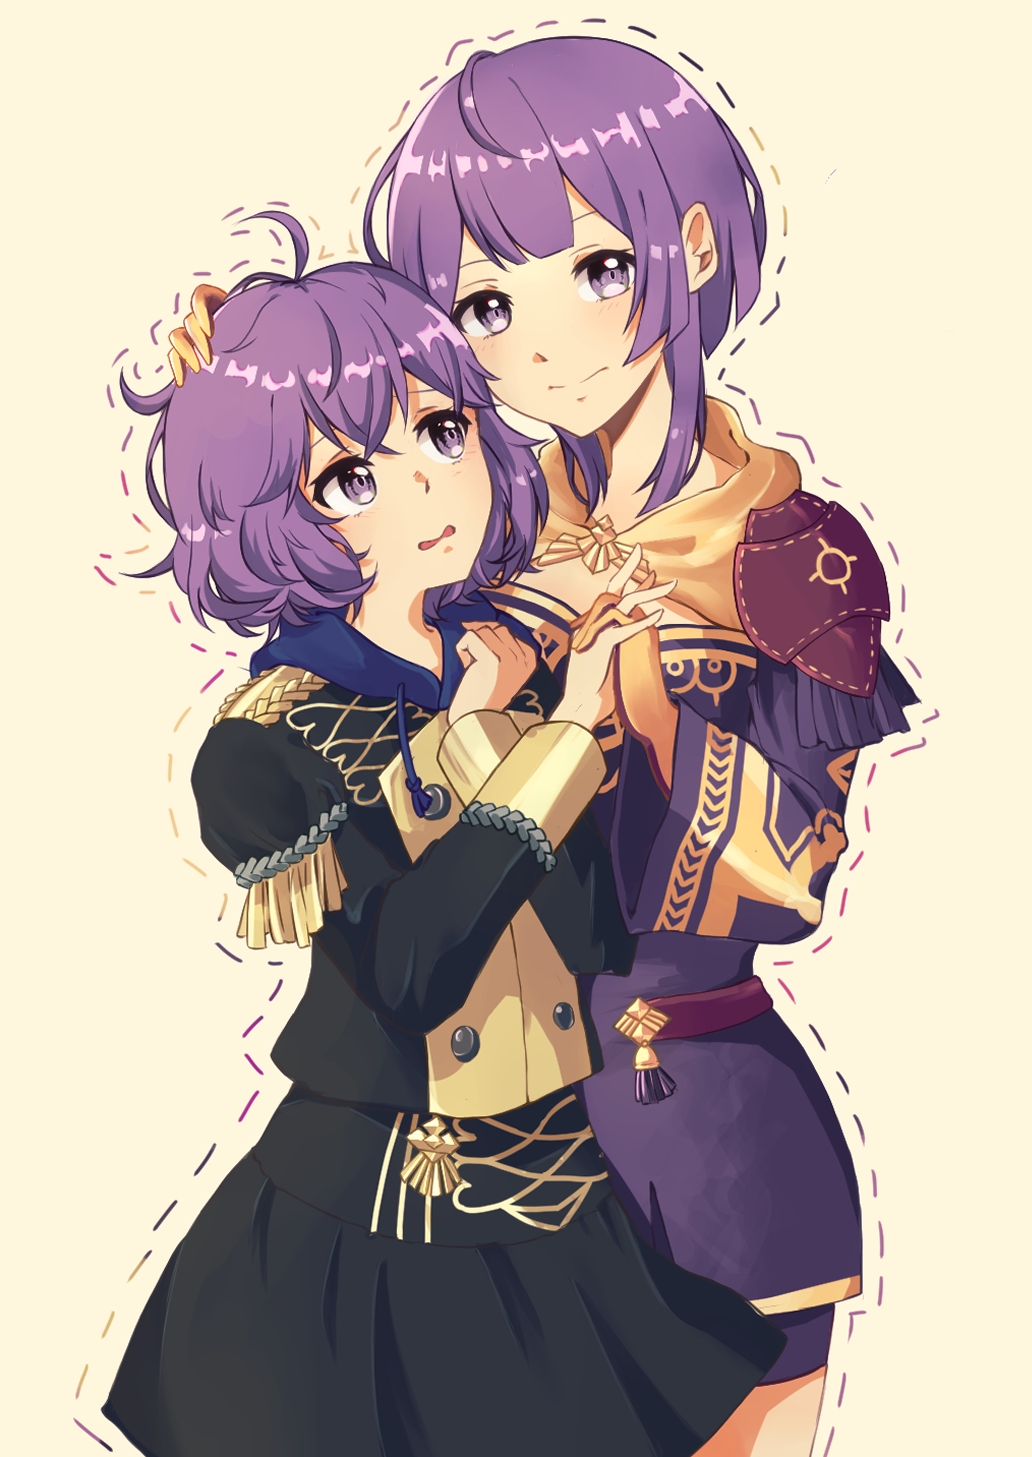 2girls age_progression ahoge armor bernadetta_von_varley dotted_line dual_persona fire_emblem fire_emblem:_three_houses garreg_mach_monastery_uniform hand_on_another's_head head_to_head highres interlocked_fingers looking_at_another looking_at_viewer looking_to_the_side looking_up messy_hair multiple_girls nervous open_mouth outline purple_hair short_hair shorts_under_dress shoulder_armor sidelocks simple_background spaulders t_amayuki_b tan_background violet_eyes